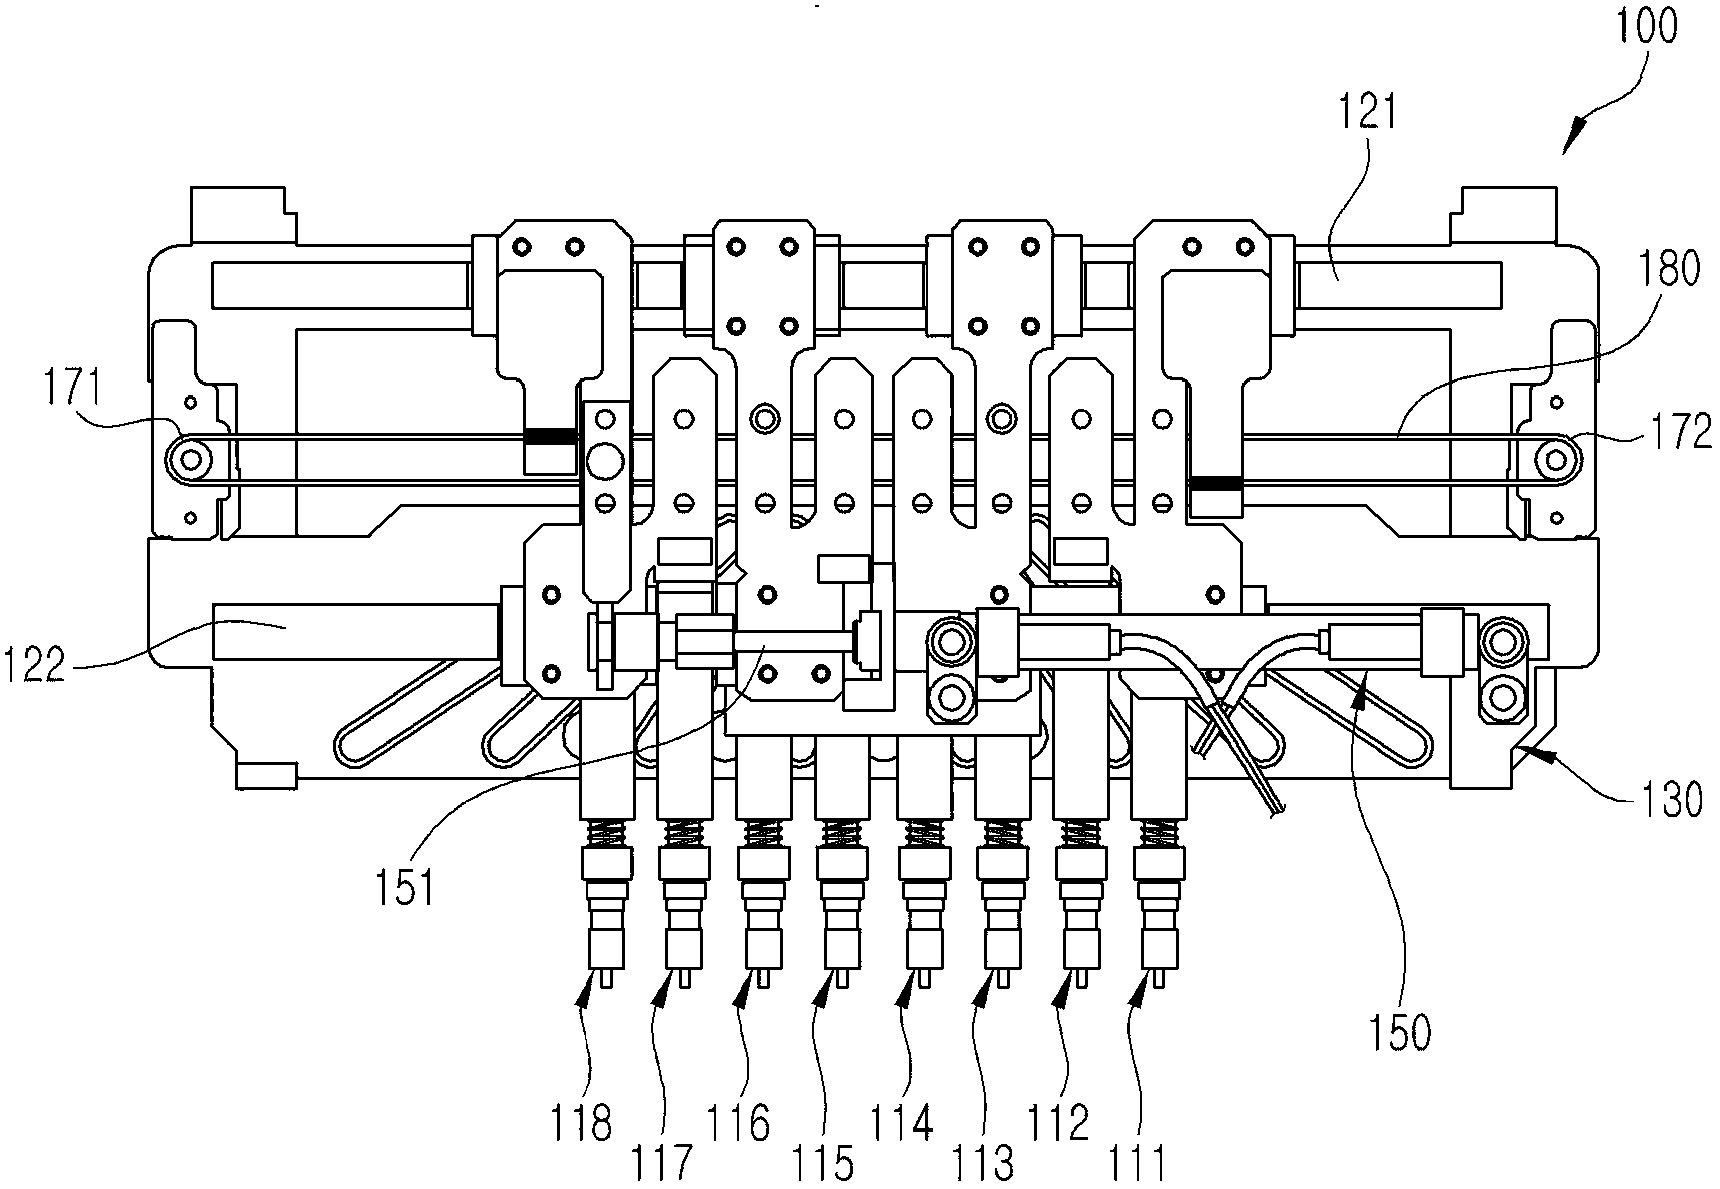 Pick and place apparatus for testing separator